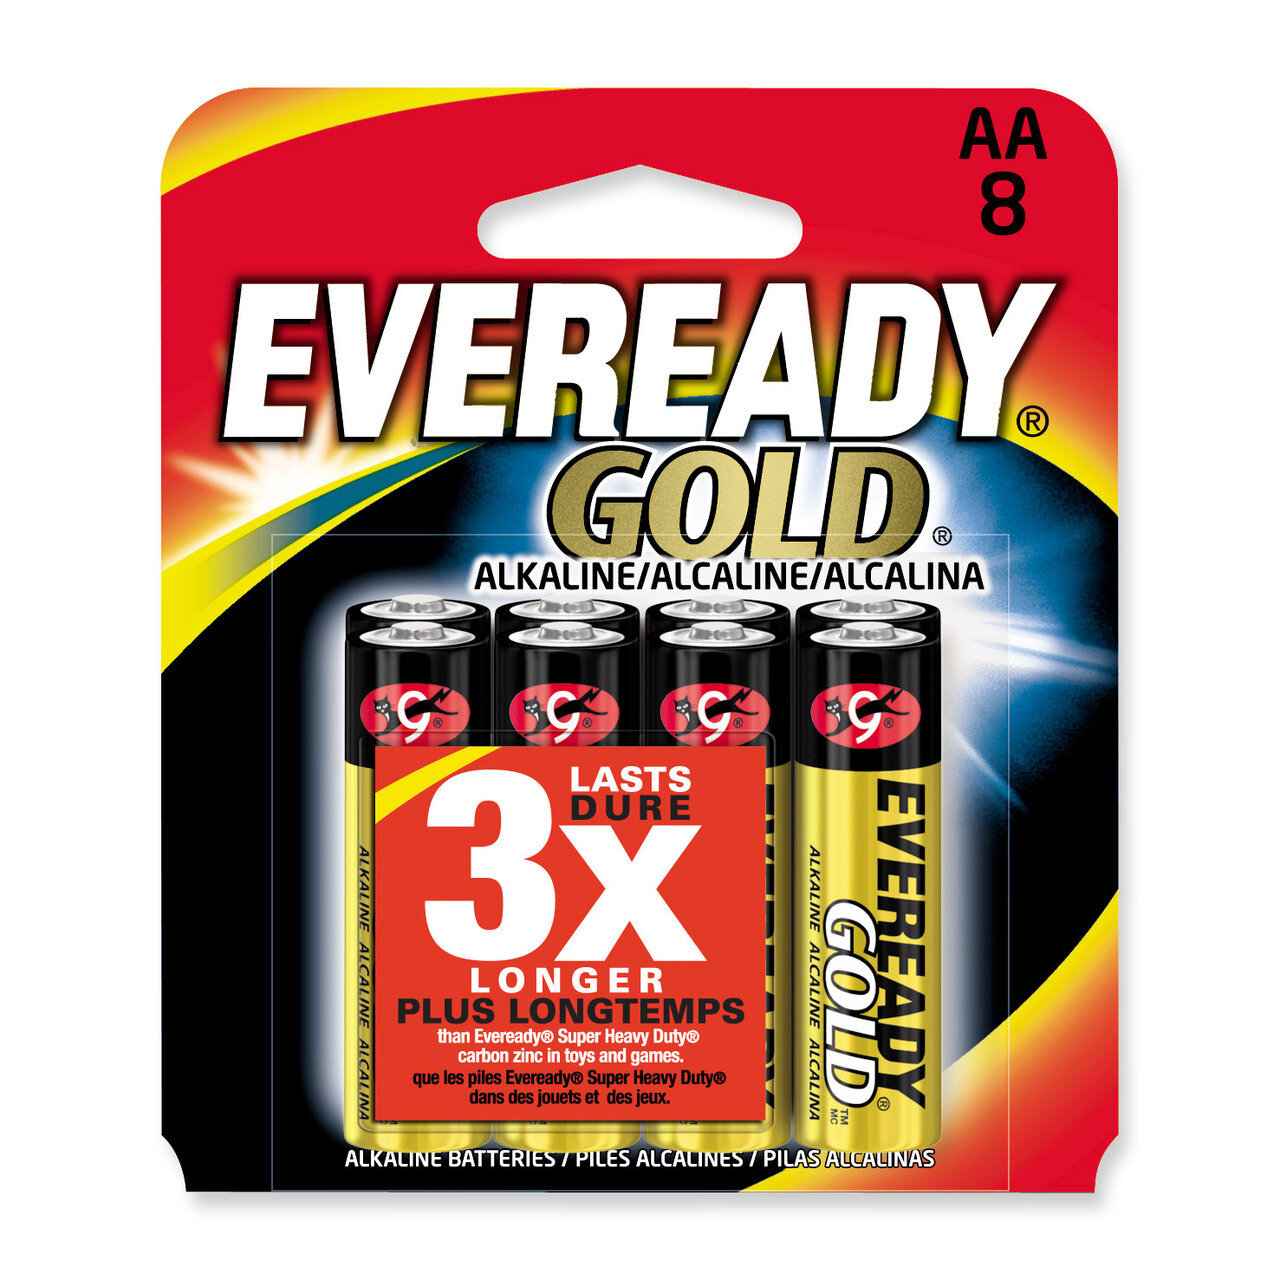 (8) Pack of Eveready Gold Batteries WBAA